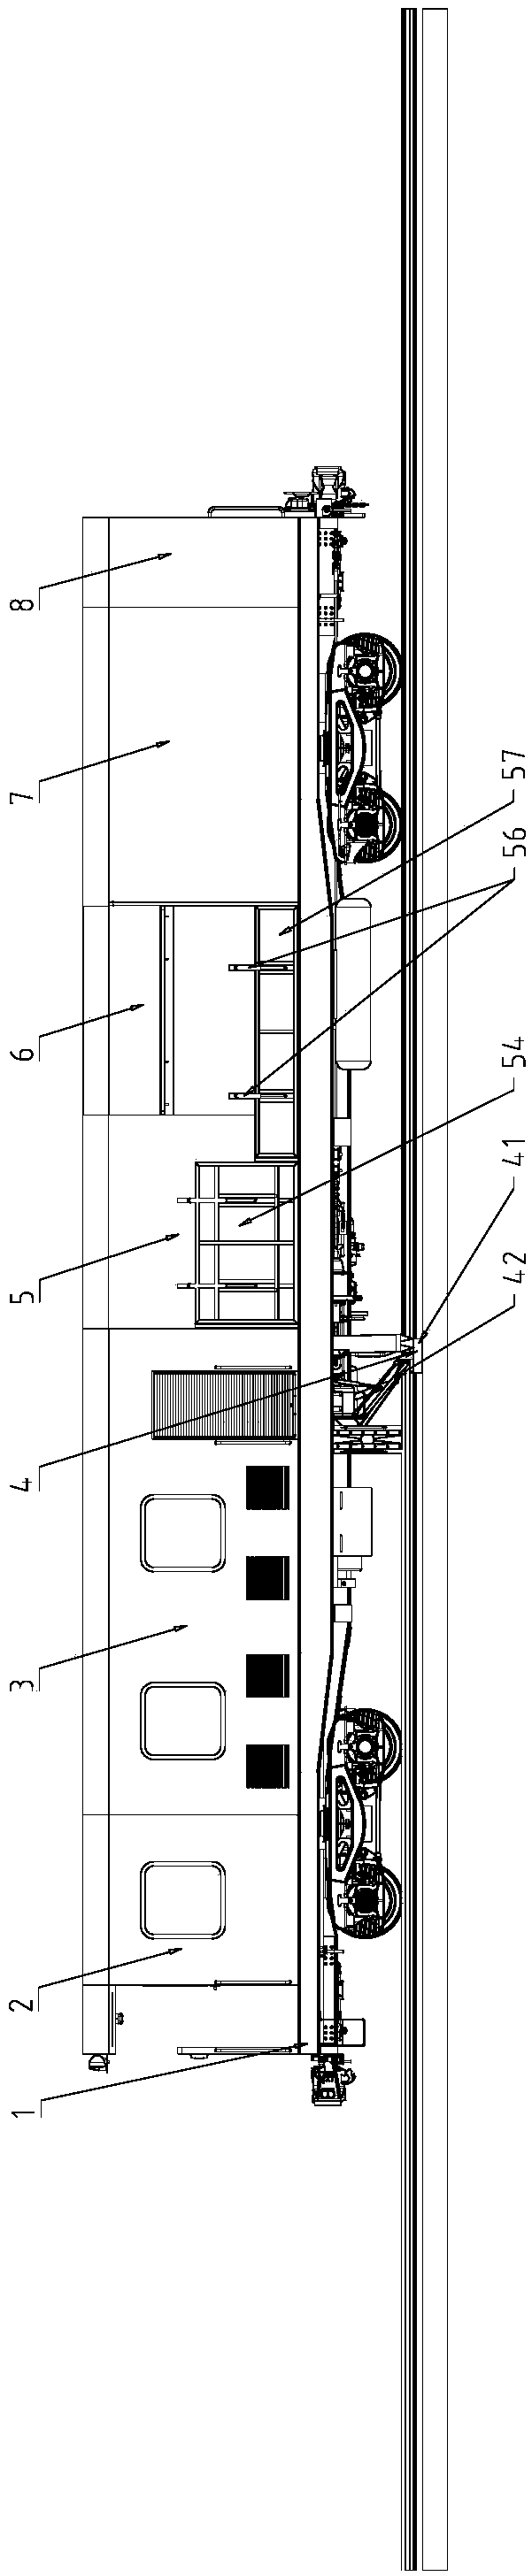 Suction-type track cleaning vehicle, method and application